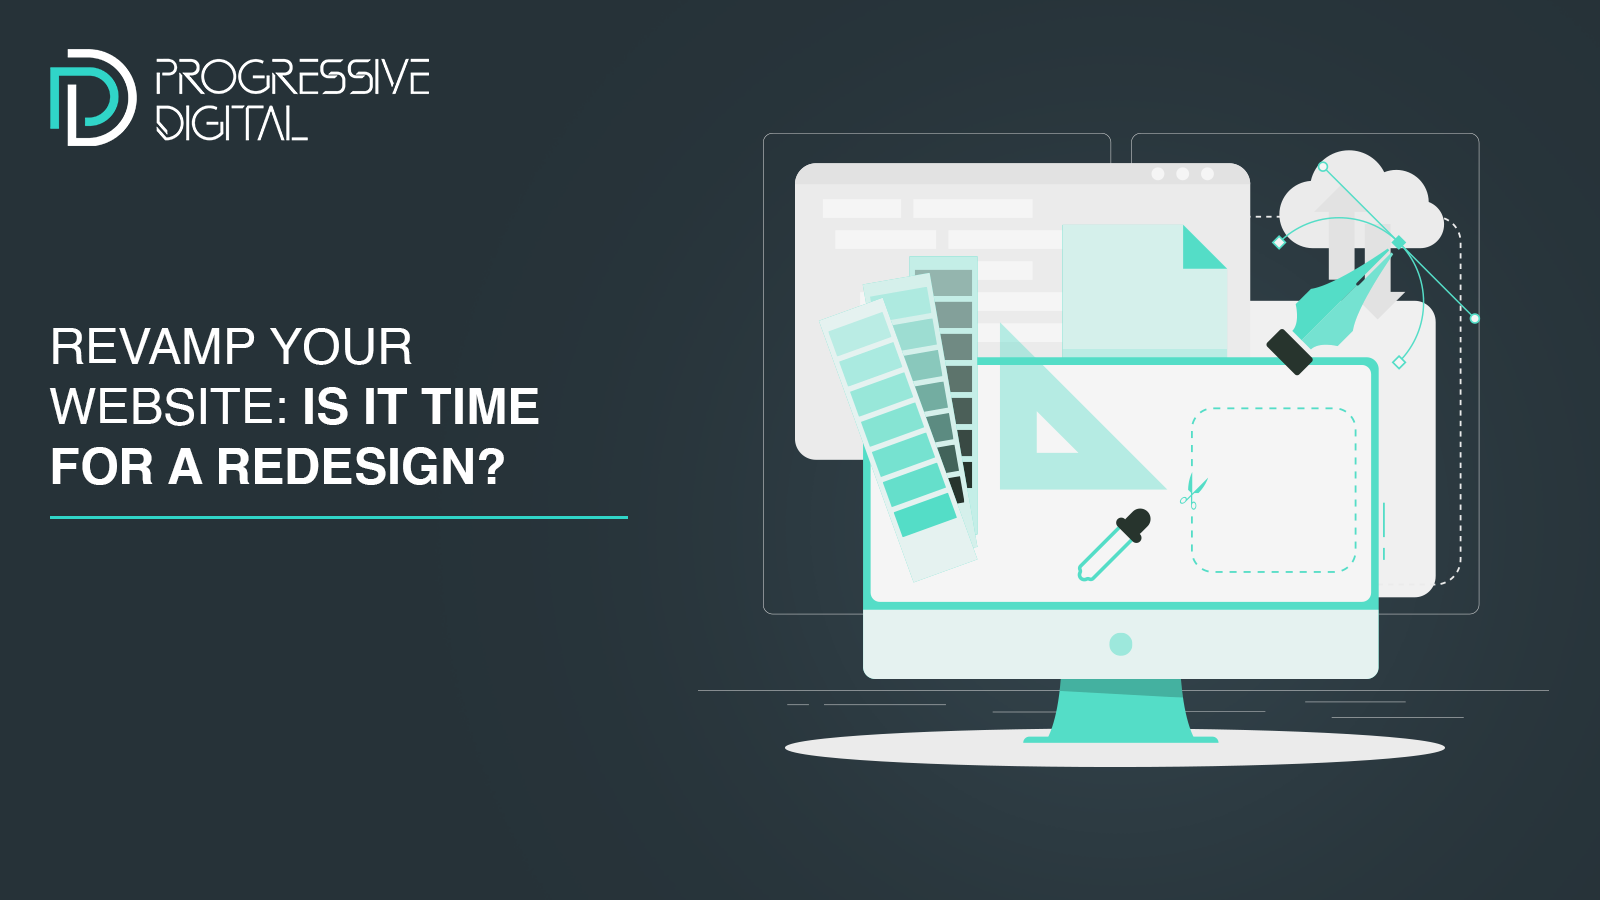 Revamp Your Website: Is It Time for a Redesign?